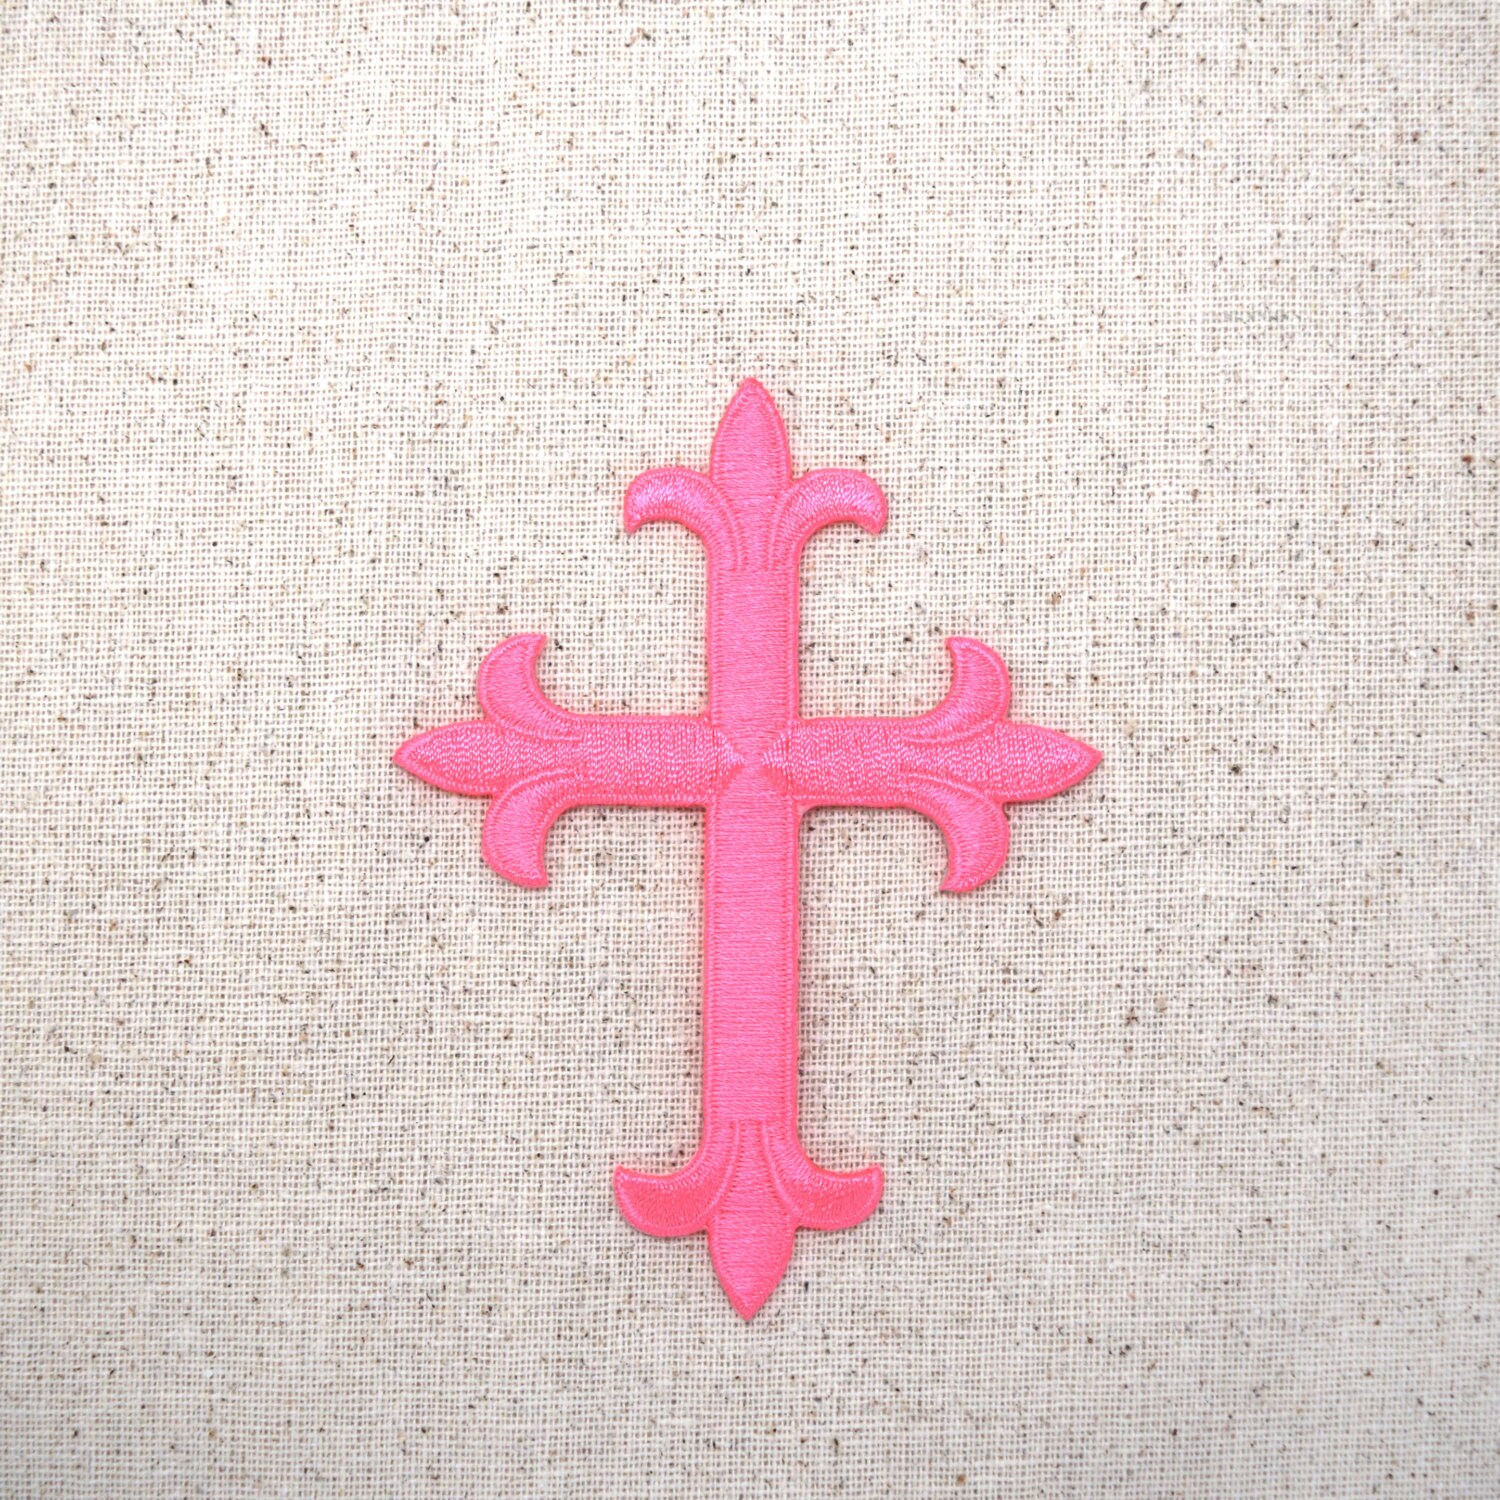 Blue & Pink Decorative Cross Patch, Religious Cross Patches